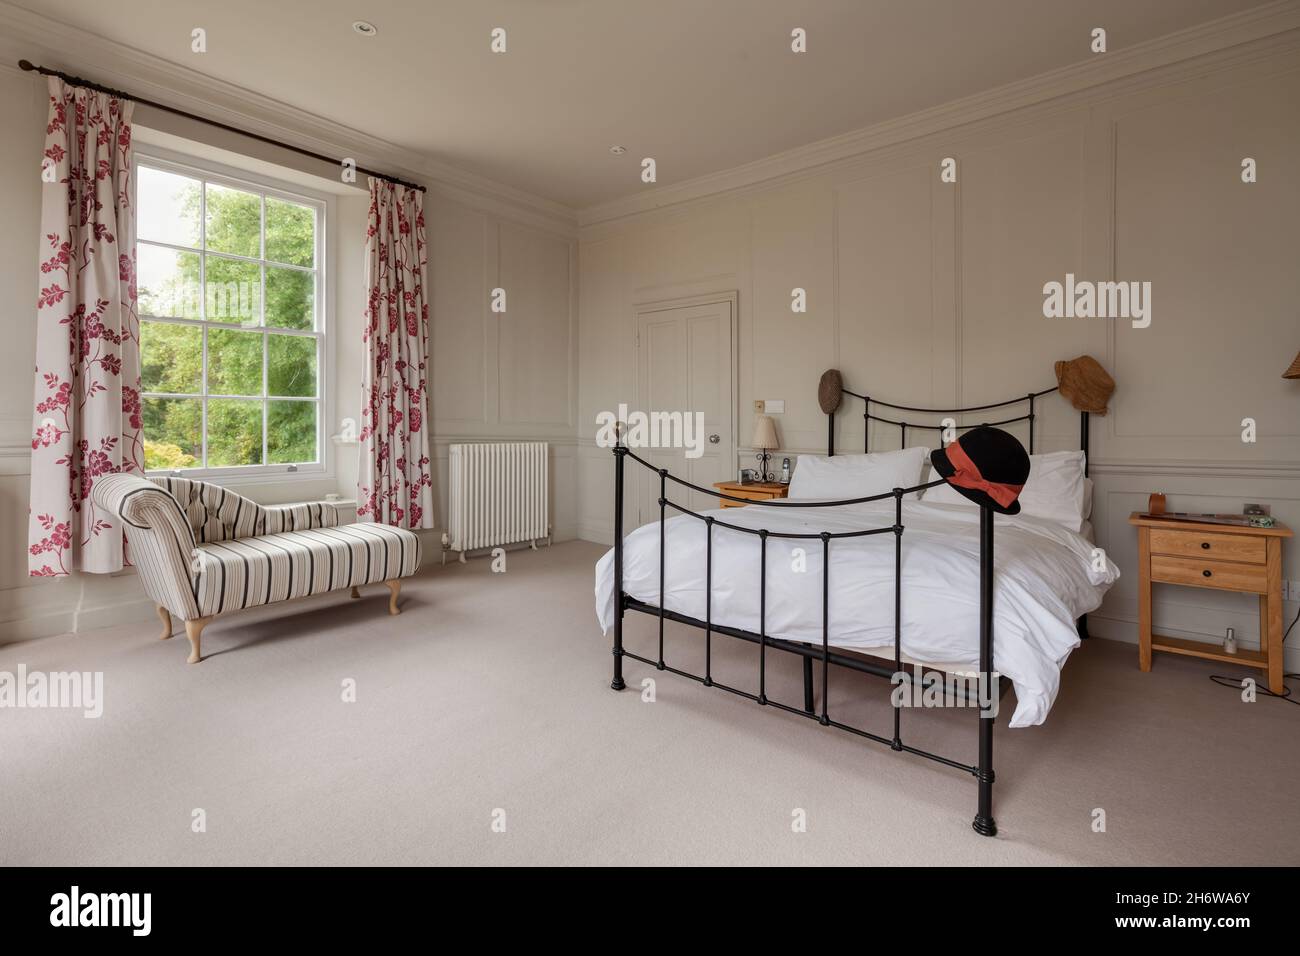 Wimbish, England - July 30 2019: Bedroom in English period home with   beautifully decorated and flooded with light from large sash window. Stock Photo